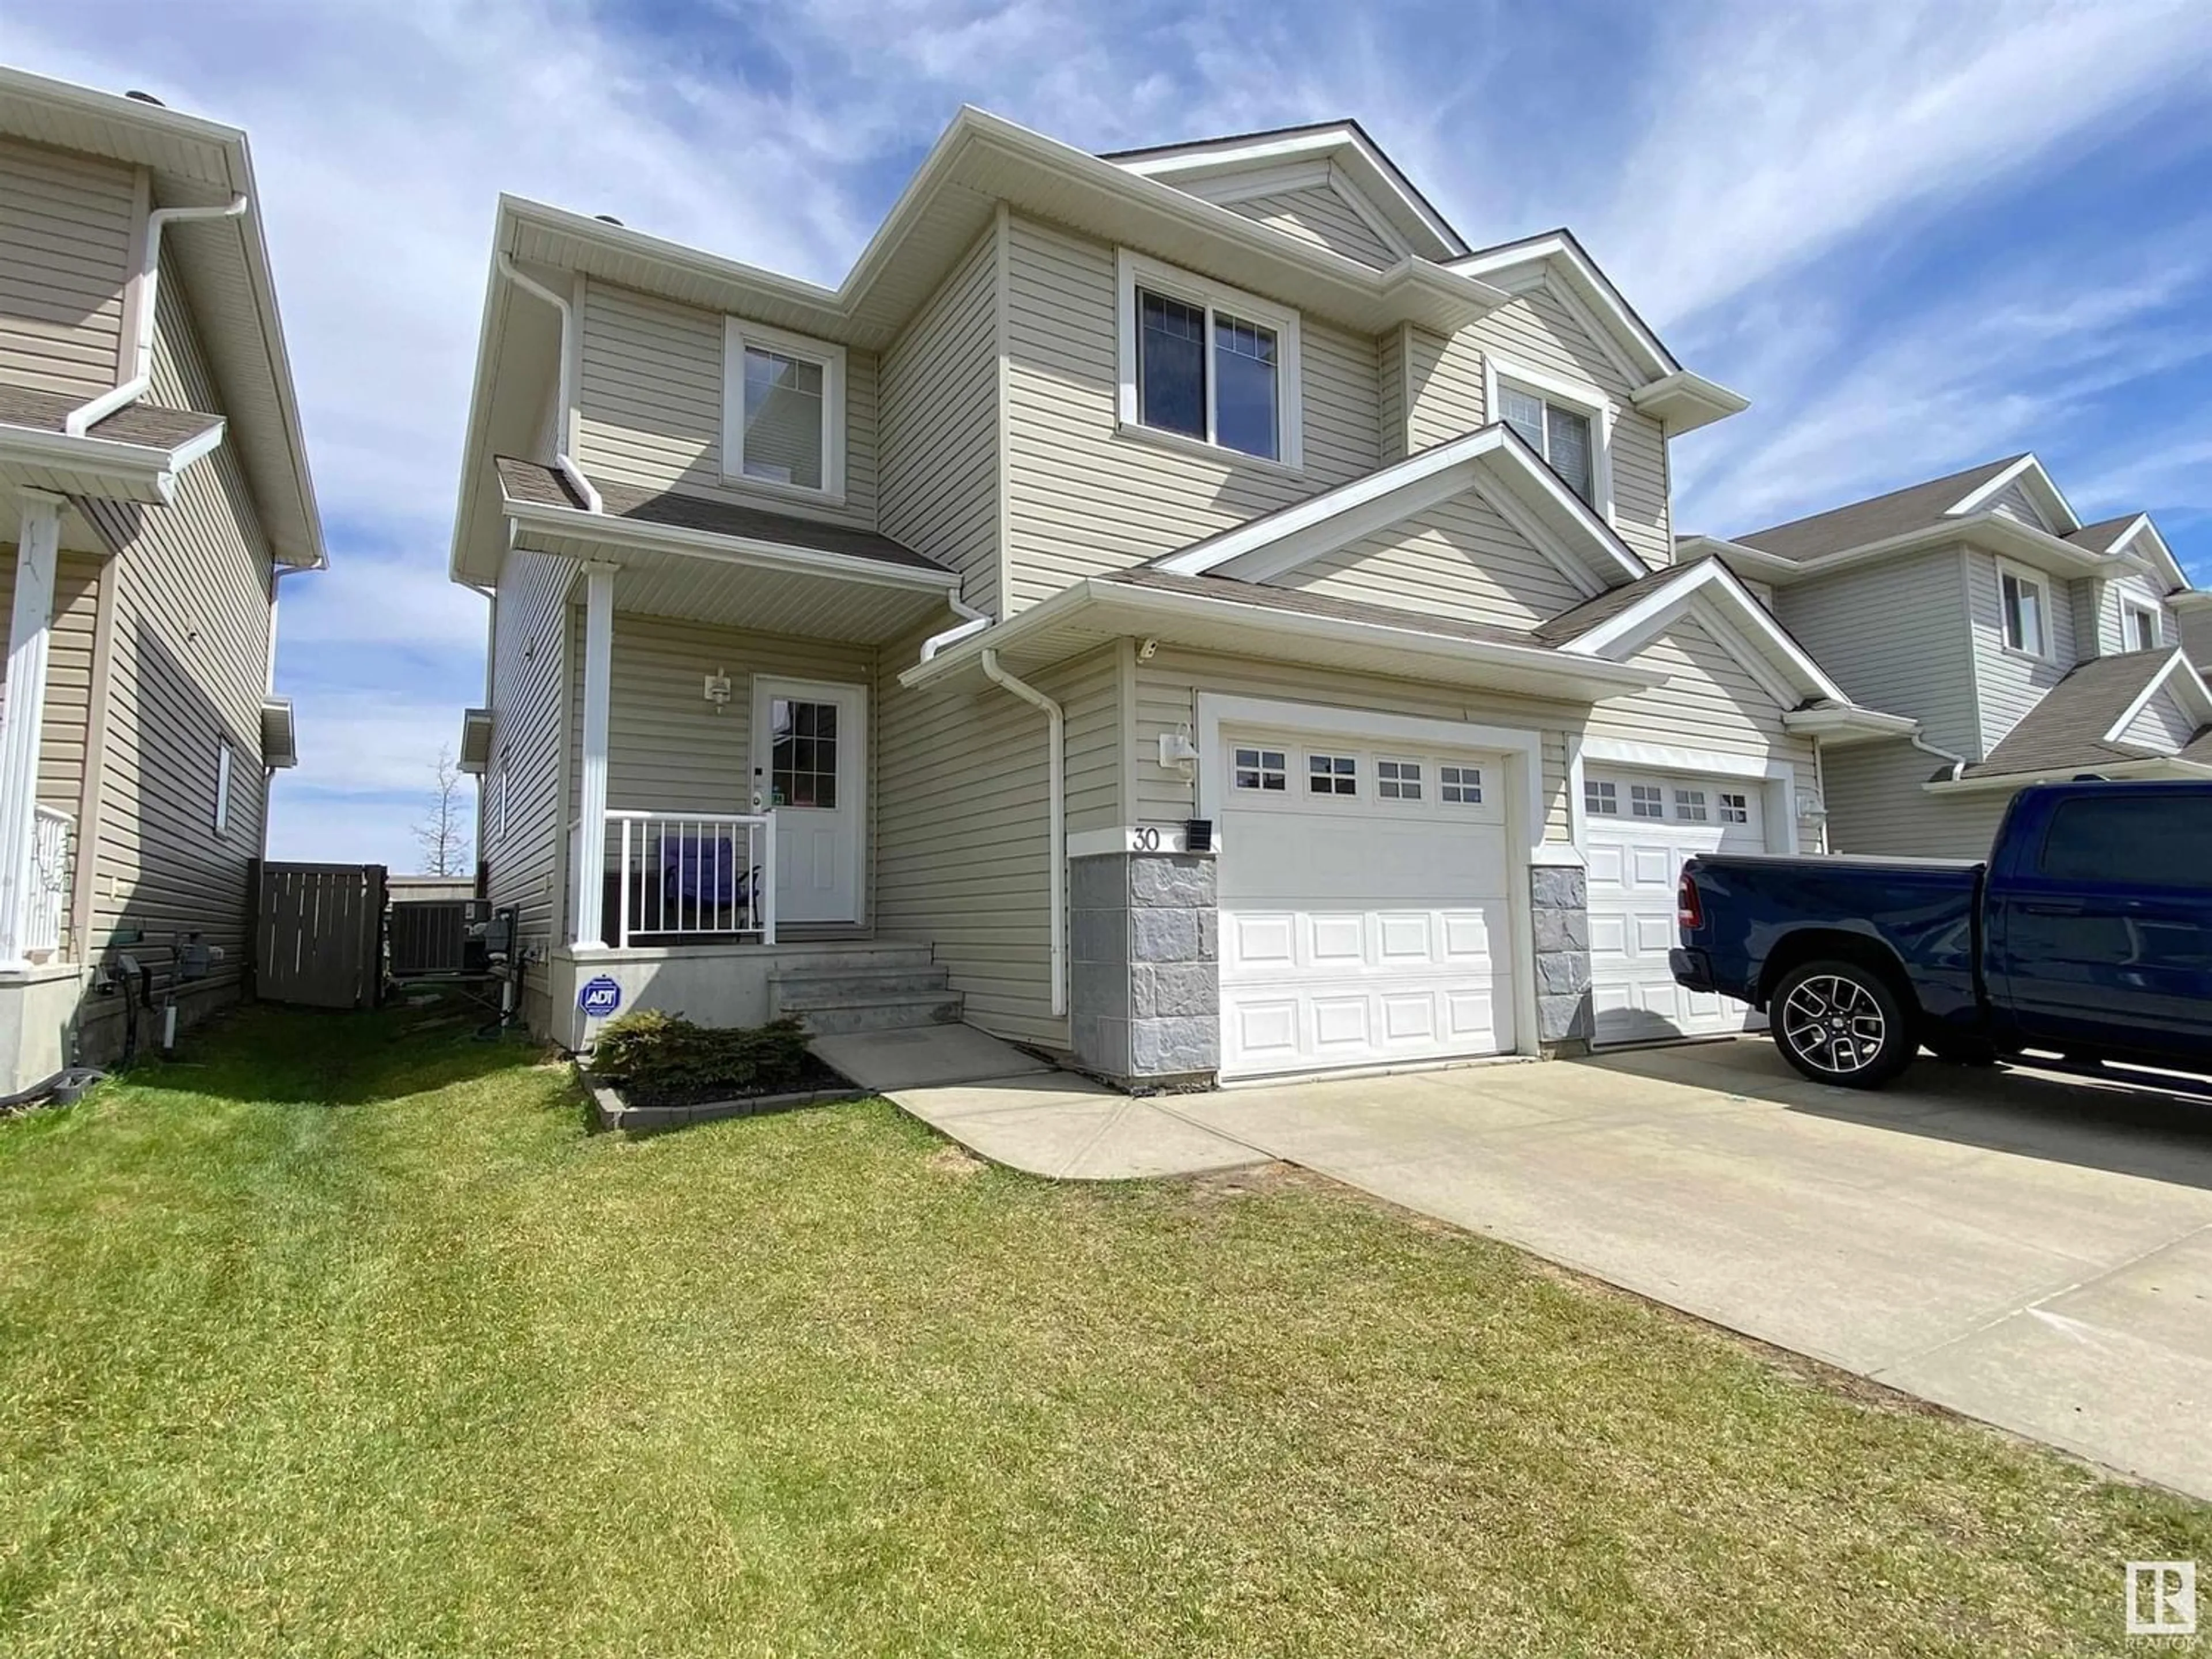 Frontside or backside of a home for #30 2503 24 ST NW, Edmonton Alberta T6T0B5